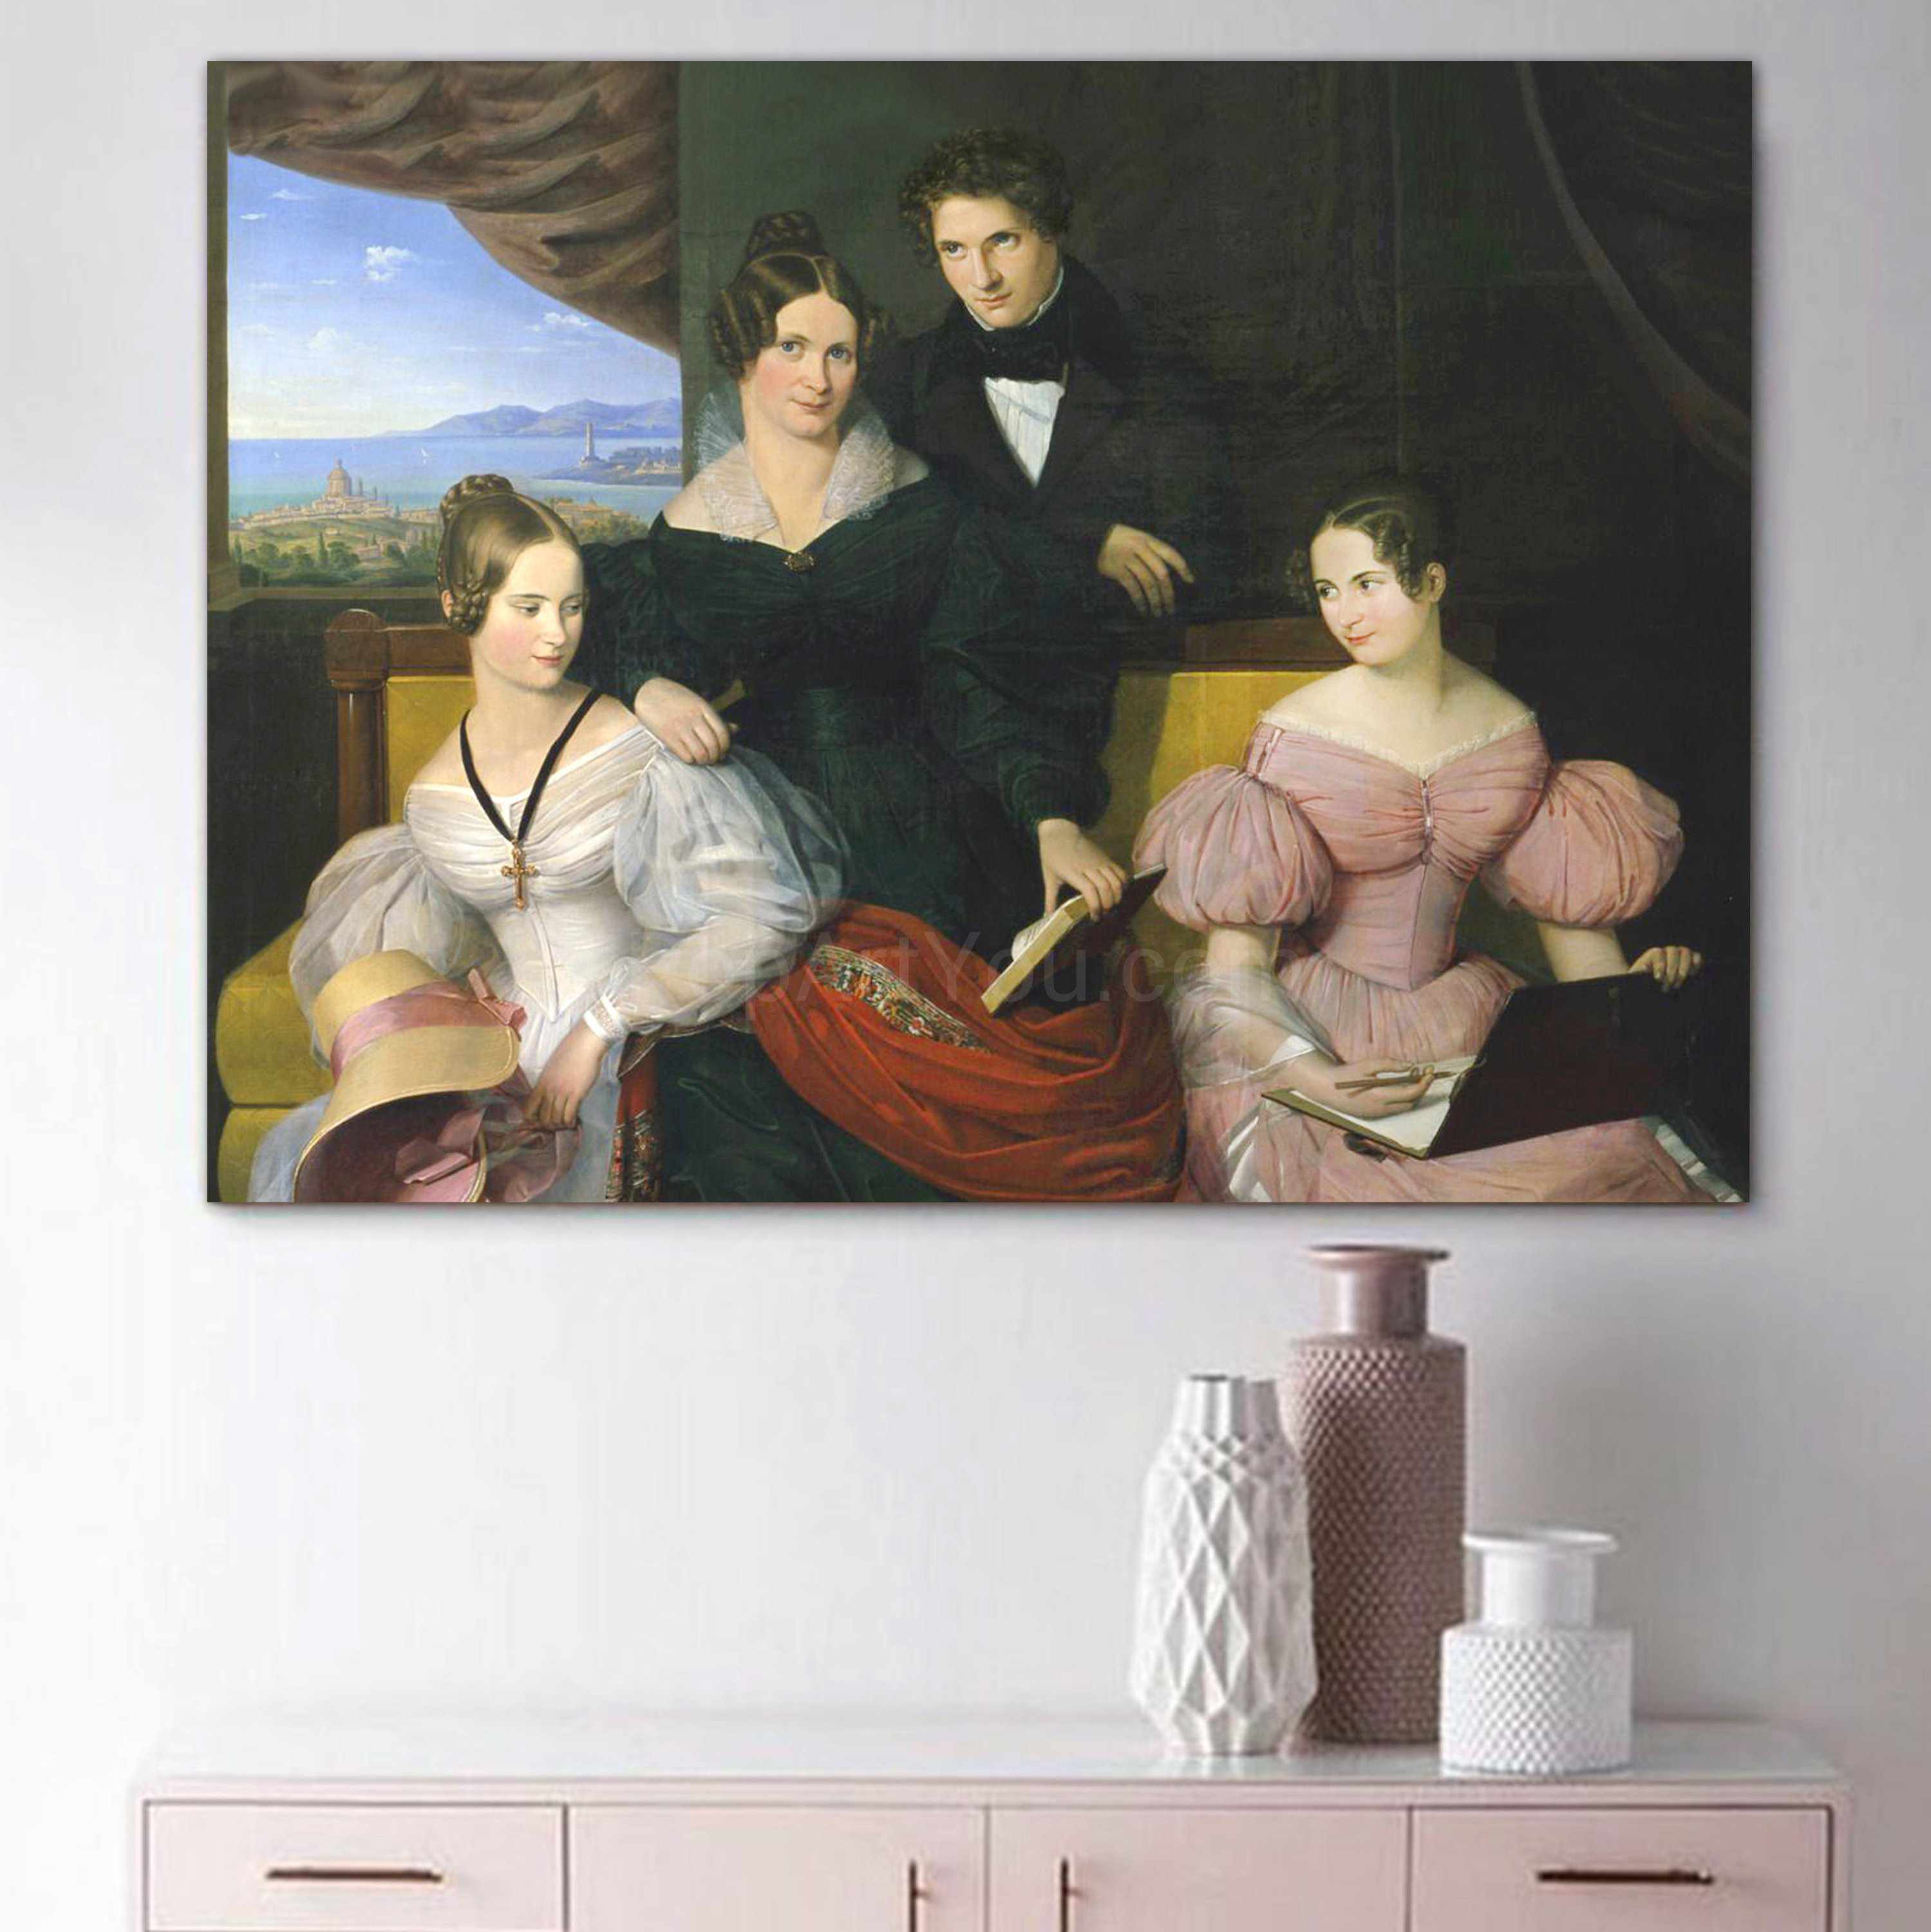 A portrait of a family dressed in historical royal clothes hangs on a white wall above three vases